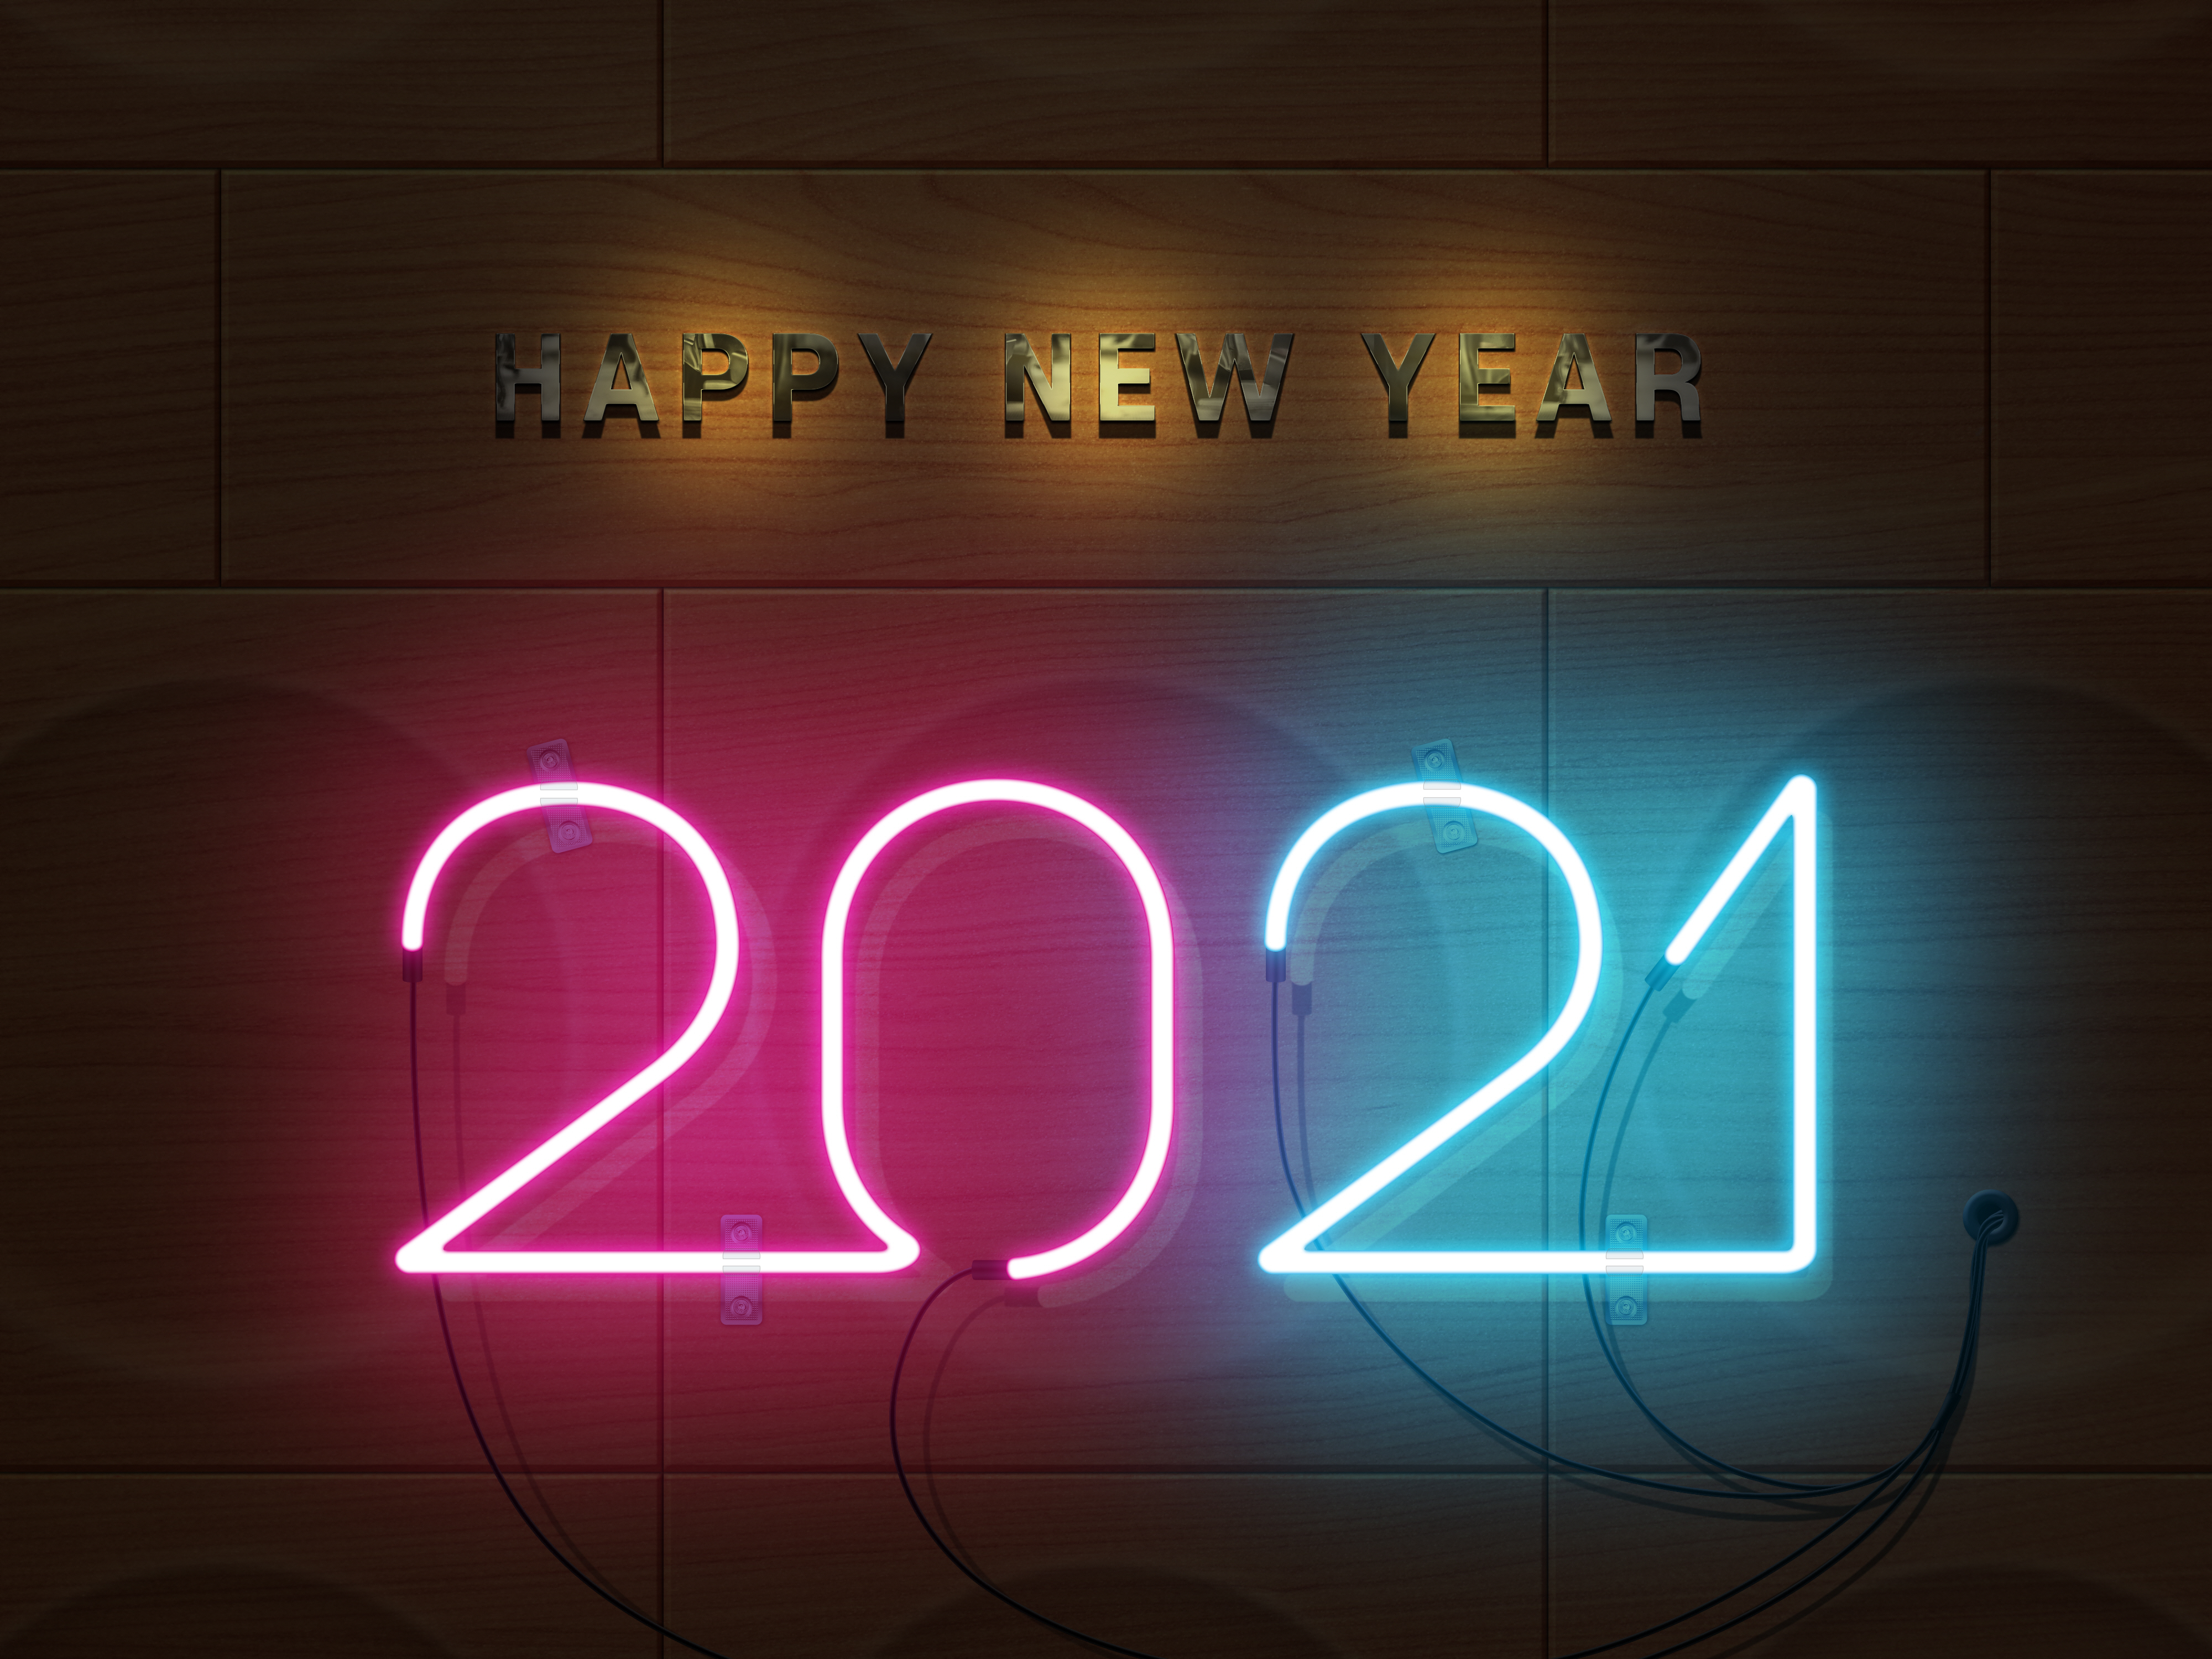 General 4000x3000 neon sign New Year neon 2021 (year) holiday